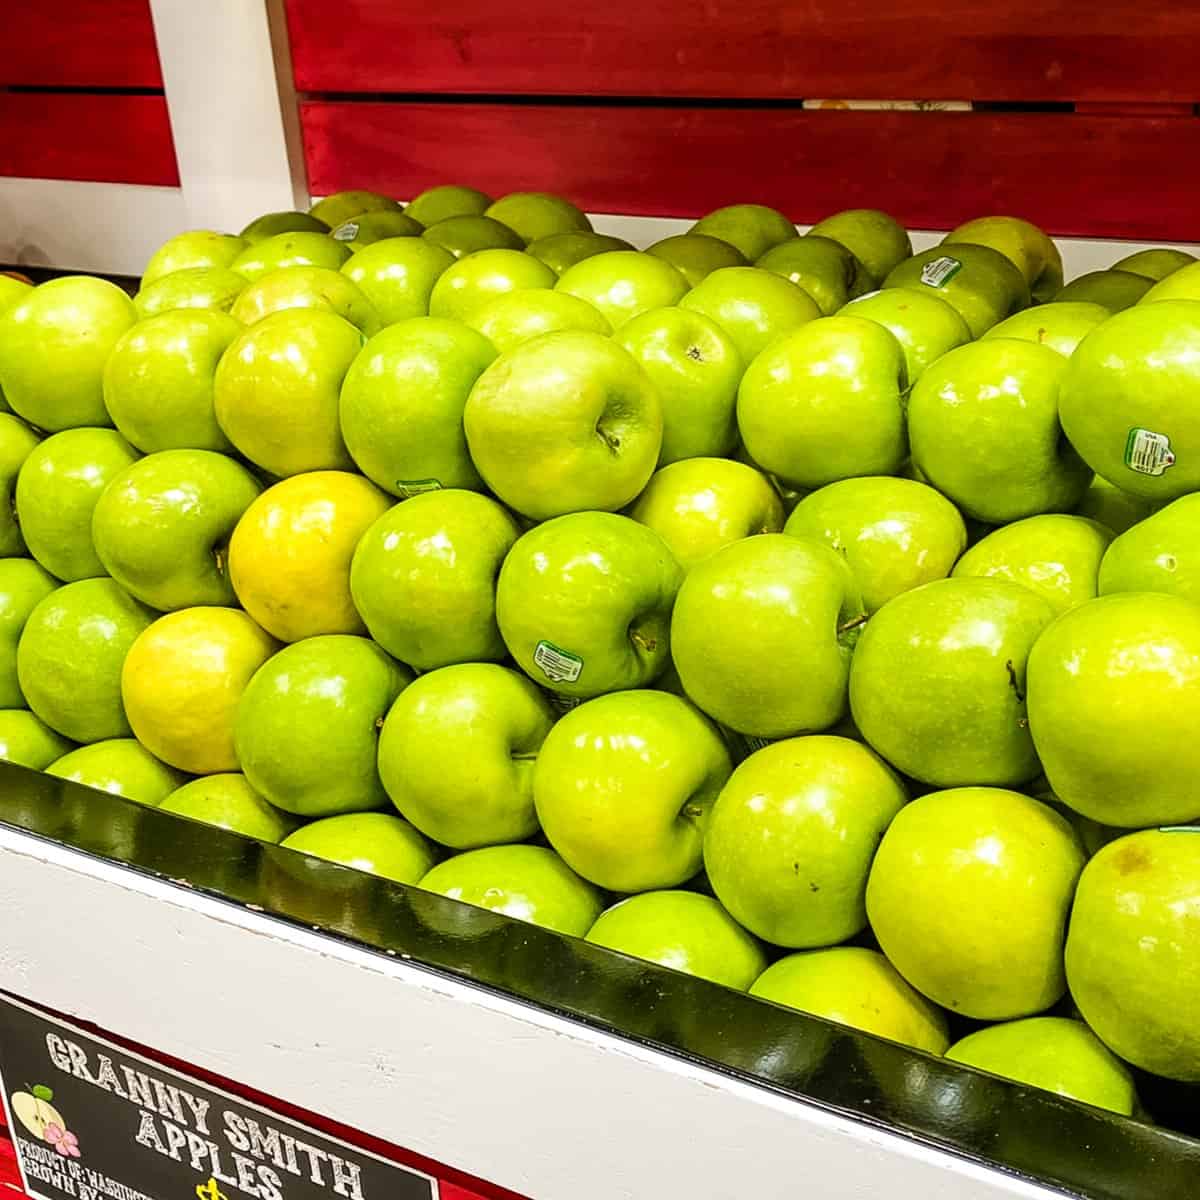 https://watchlearneat.com/wp-content/uploads/2022/06/Granny-Smith-apples-in-supermarket-ft.jpg